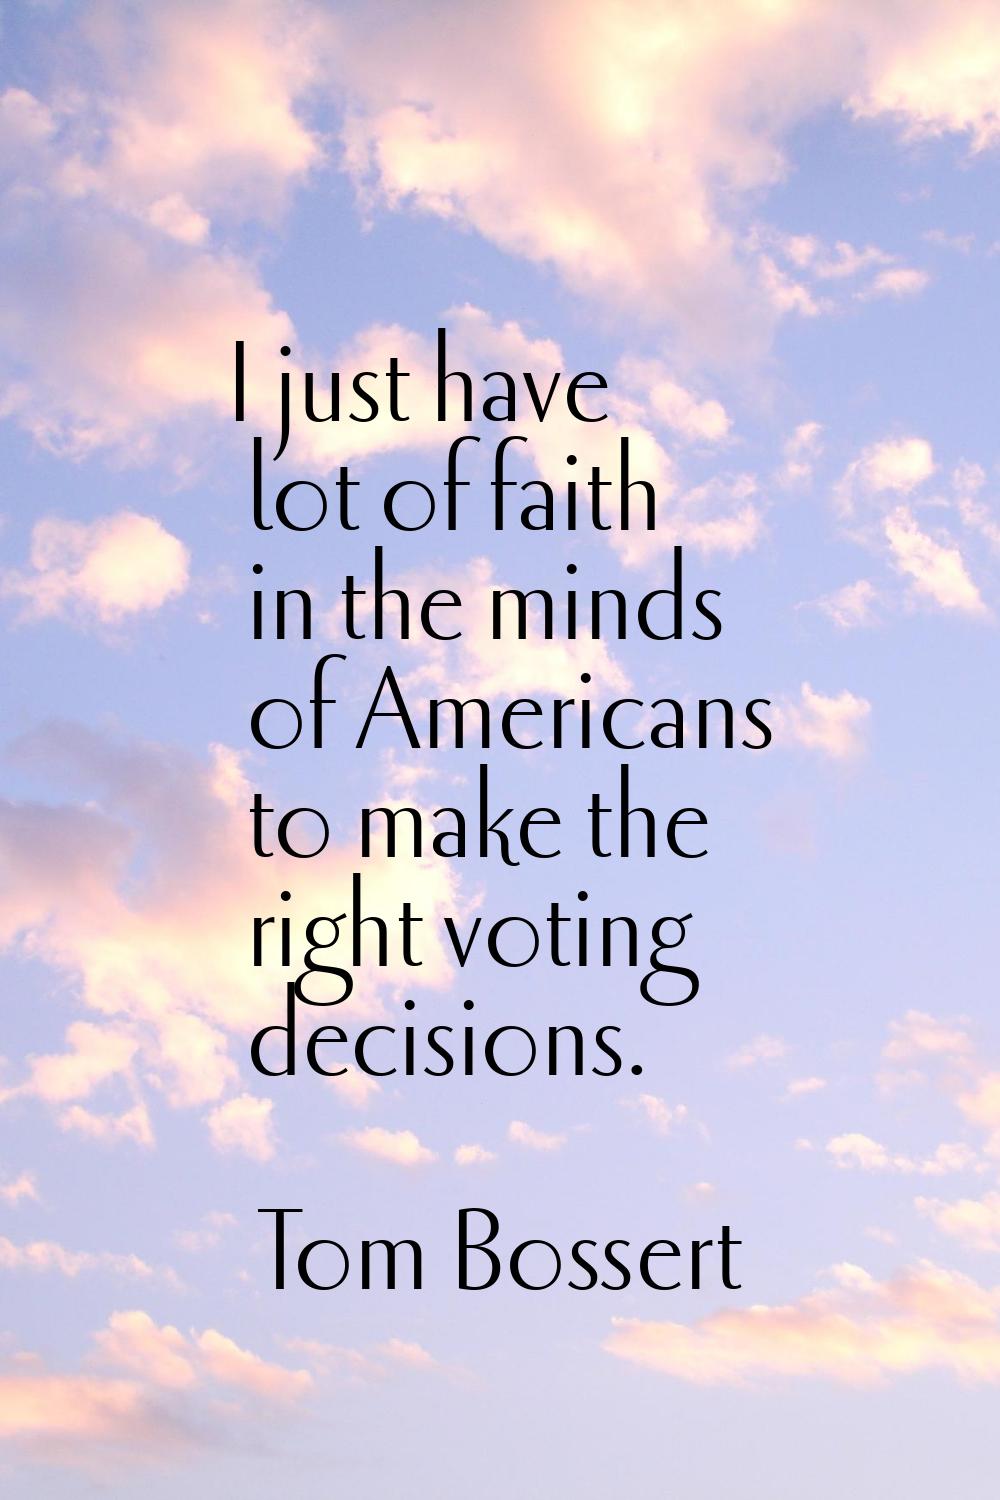 I just have lot of faith in the minds of Americans to make the right voting decisions.